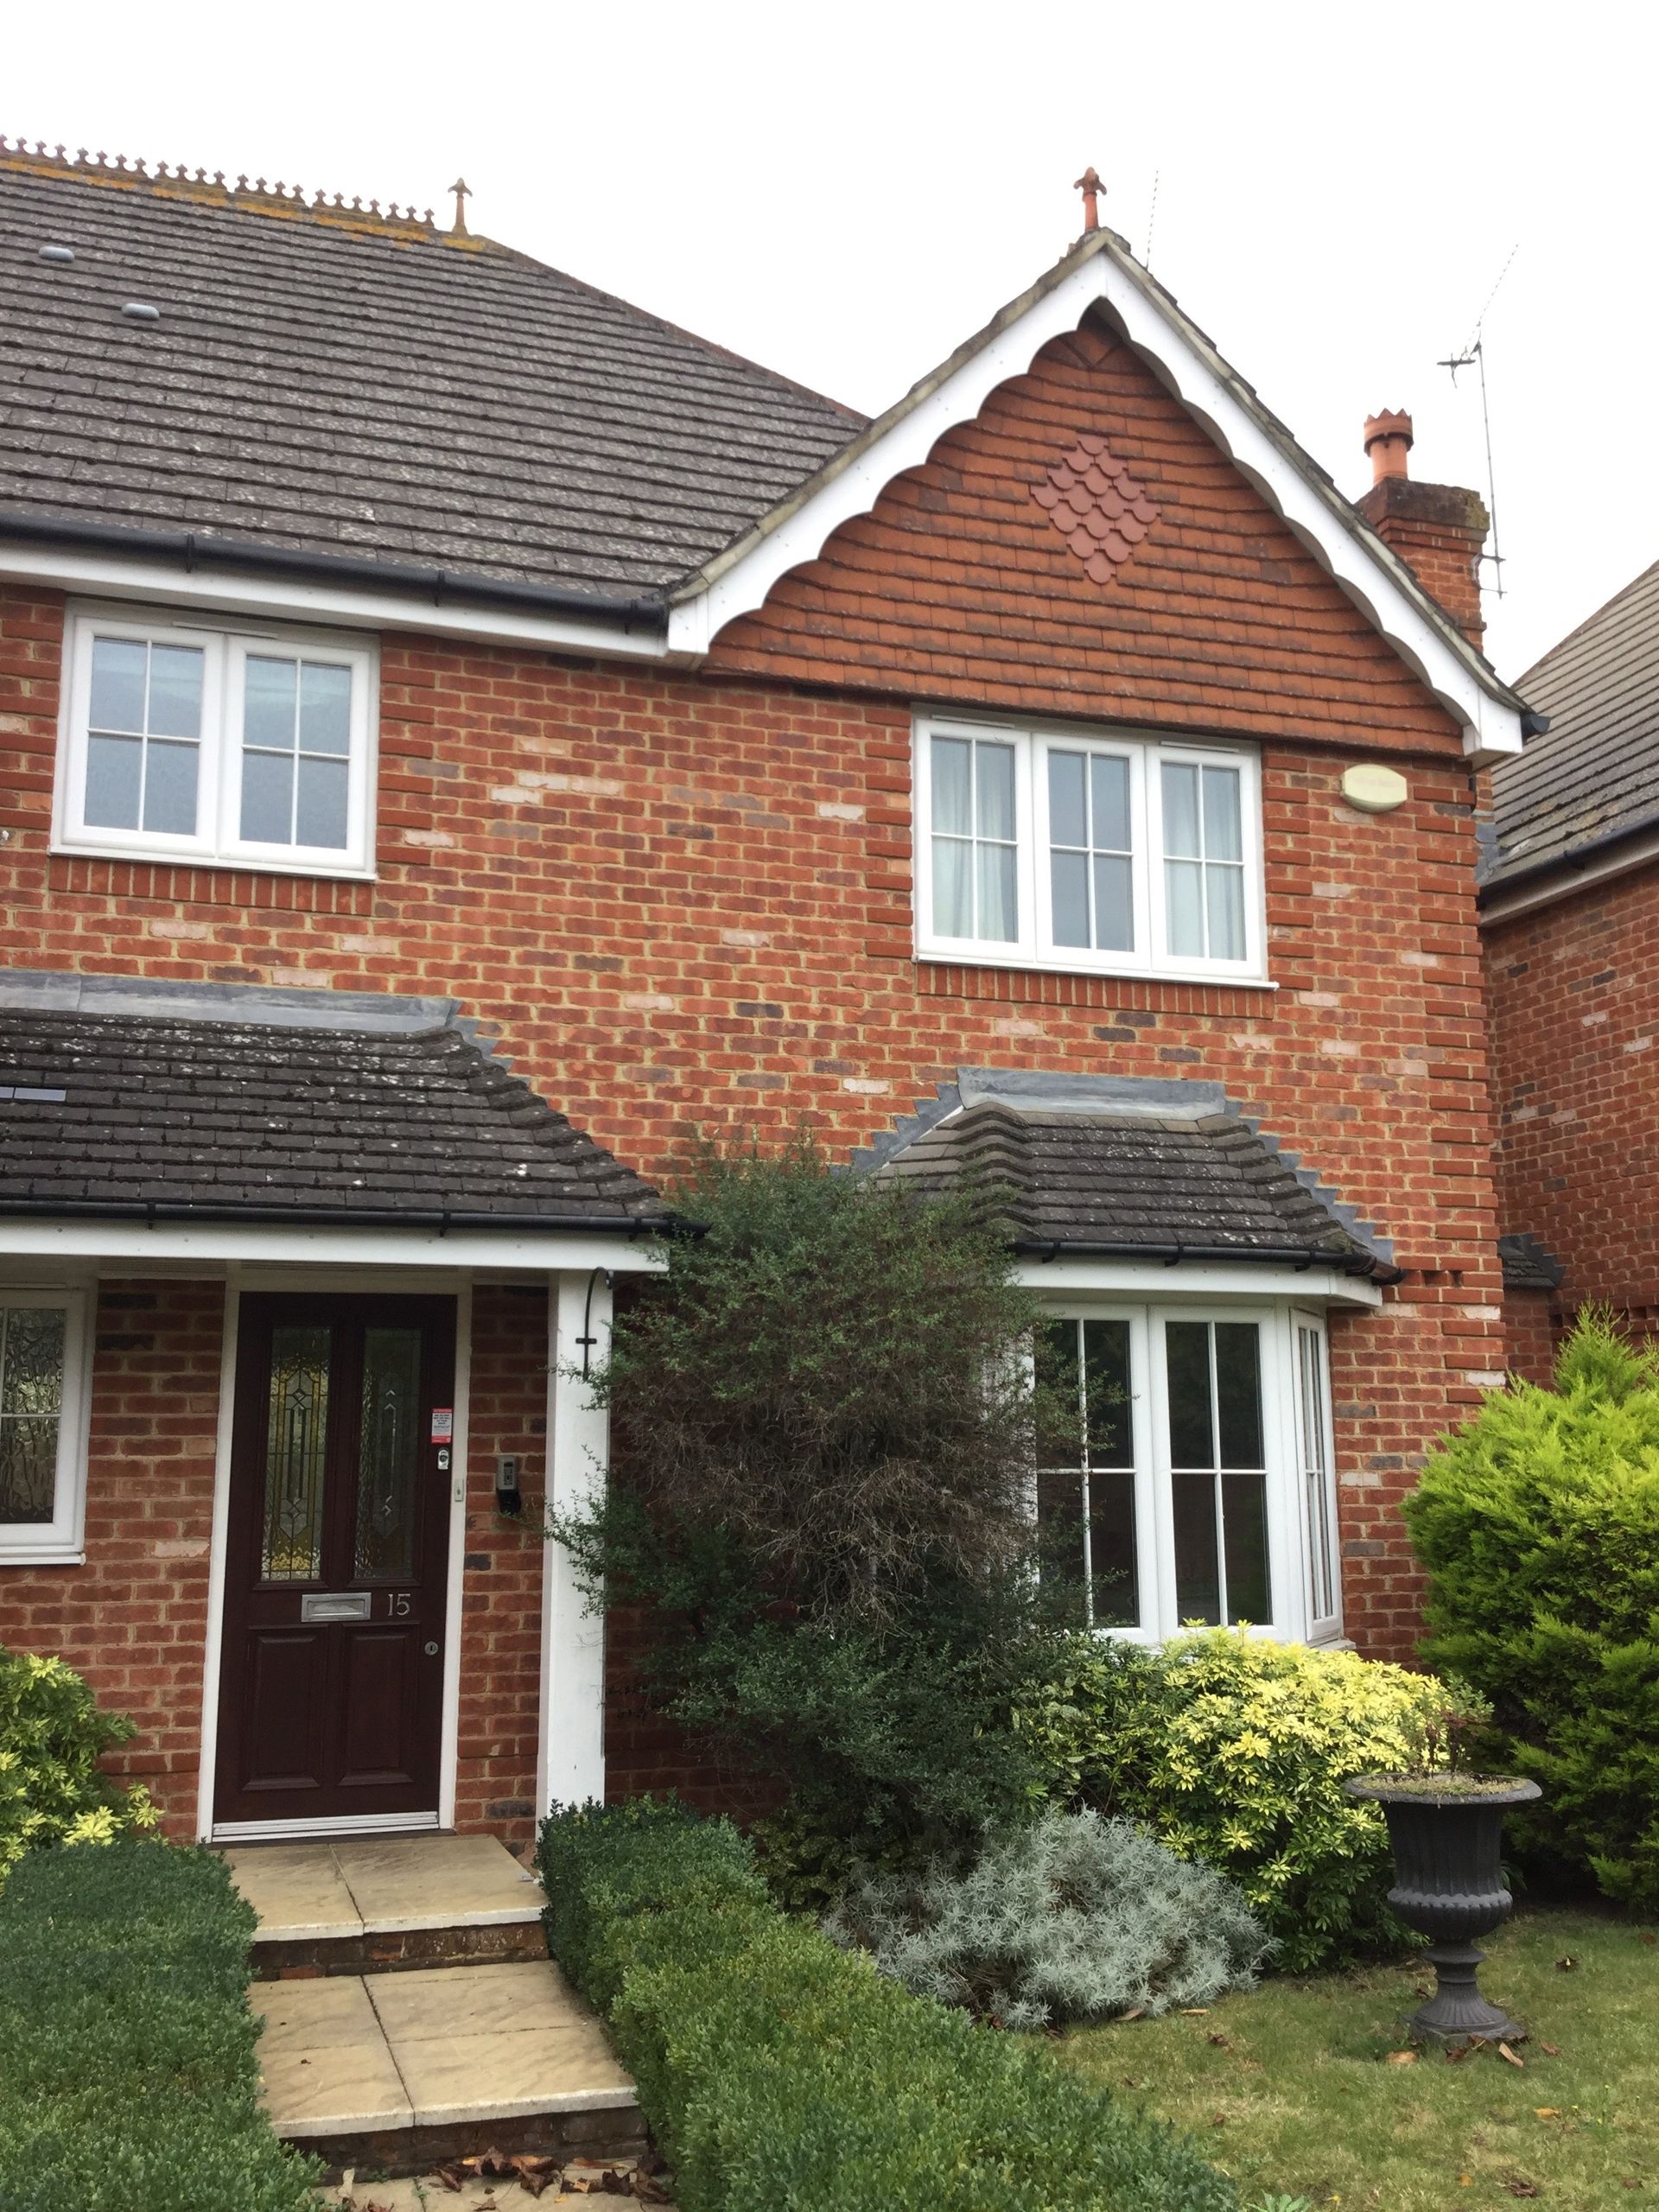 3 bed house to rent reading